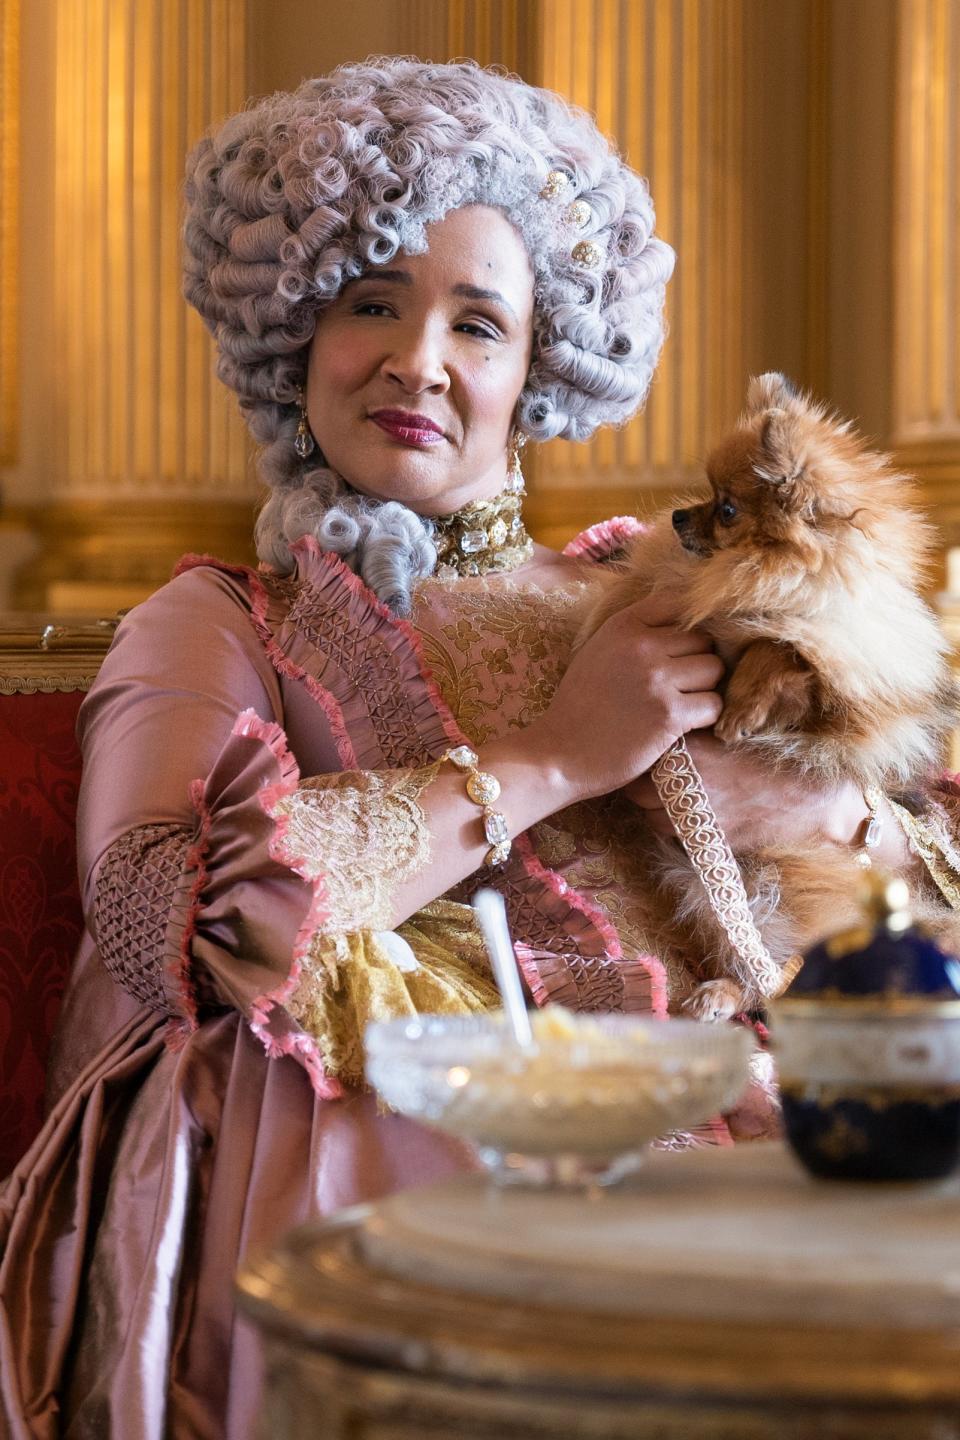 Woman in period costume with wig holds a small dog, seated in an ornate room